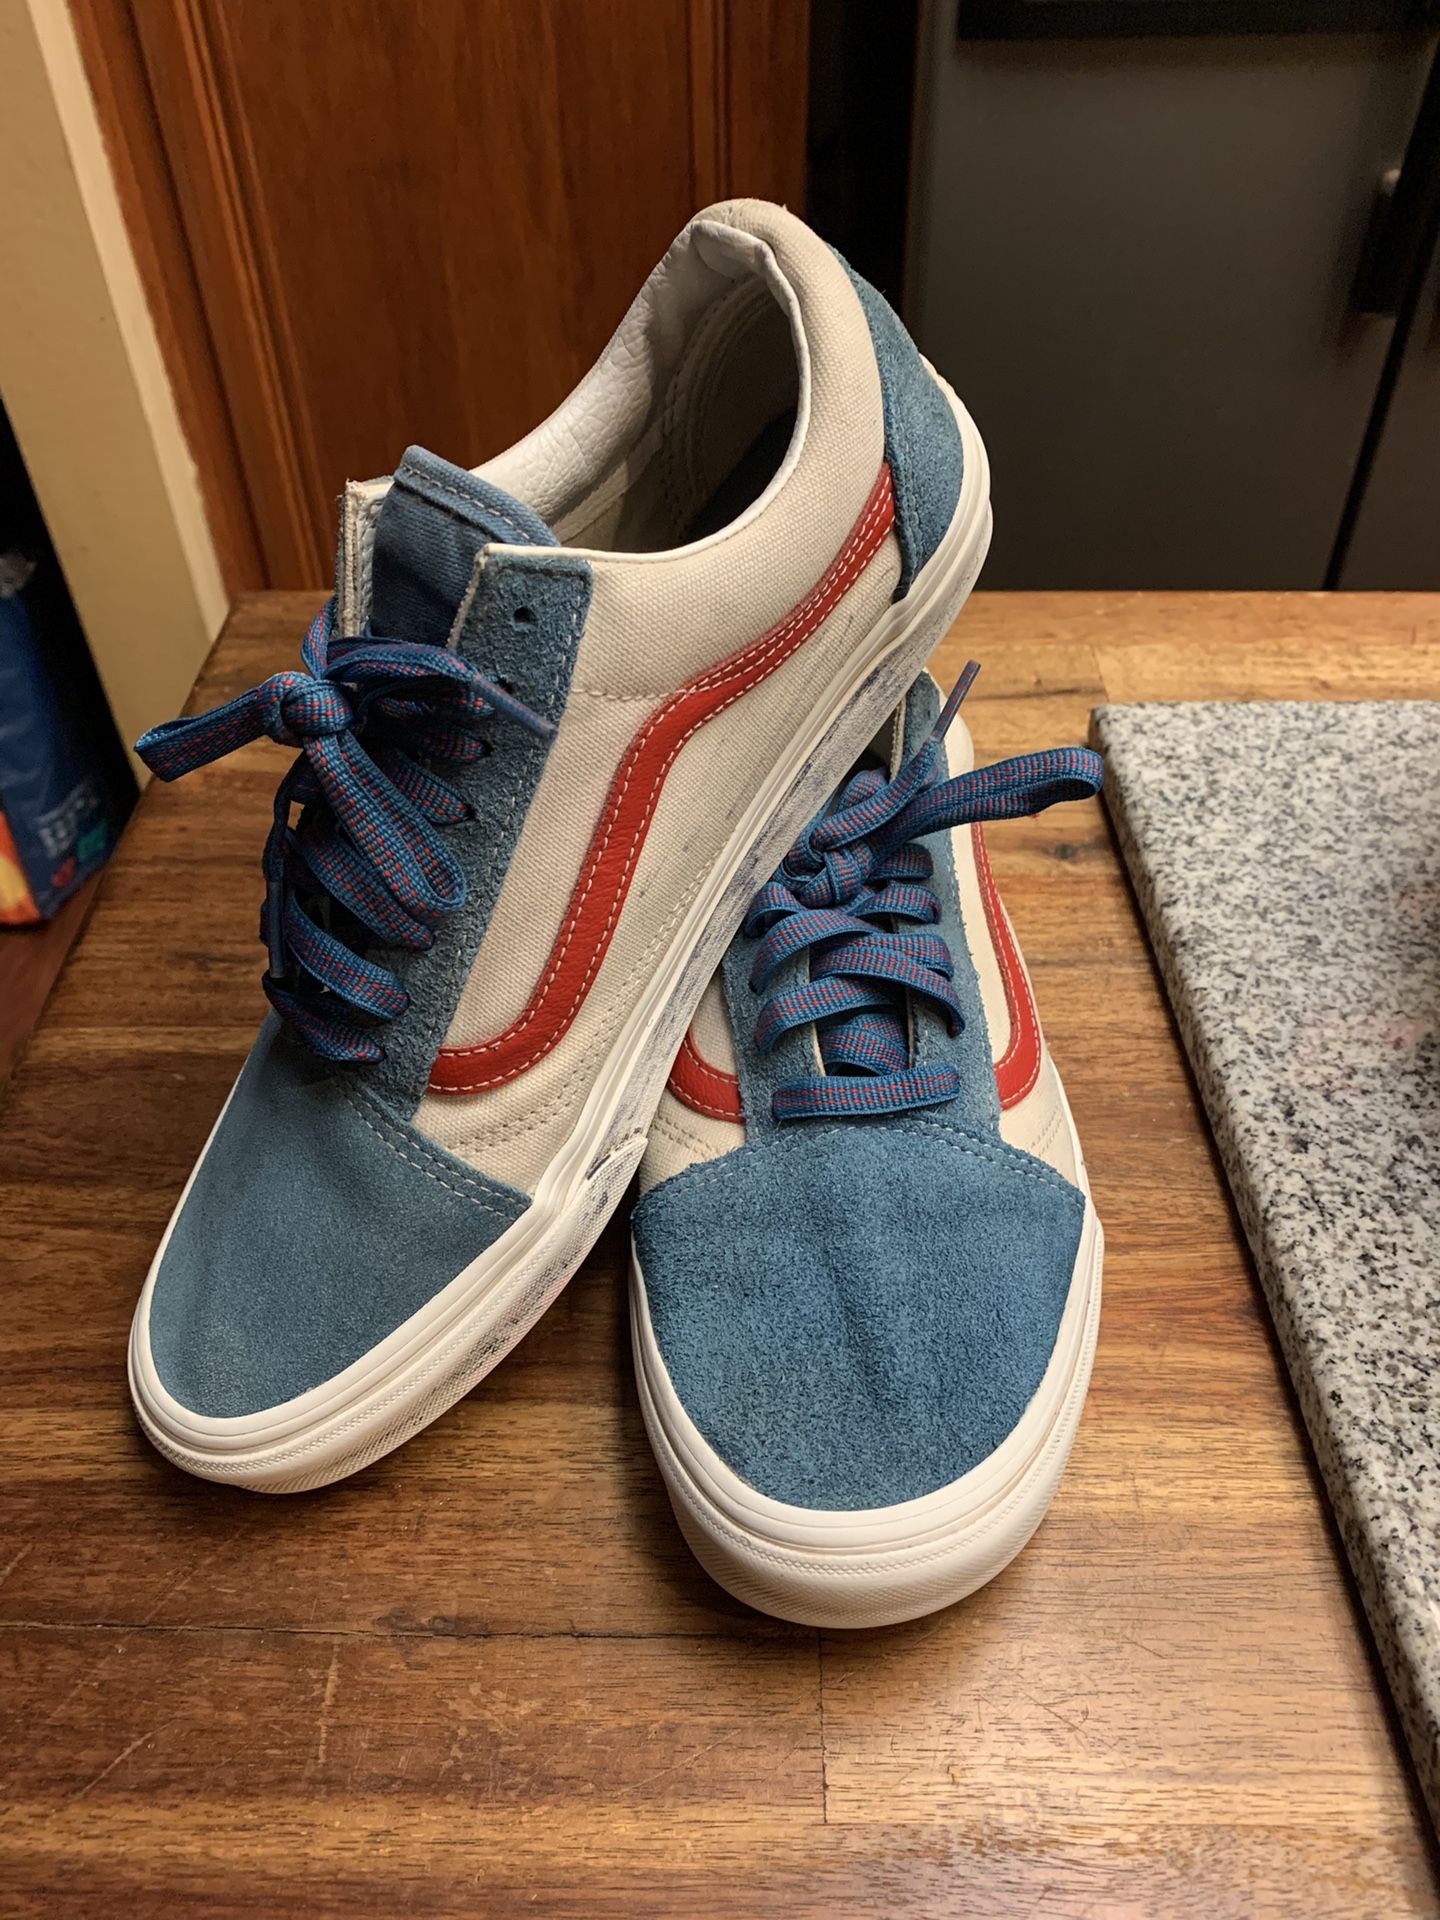 Vans, Tennis Shoes, Suede, And Canvas